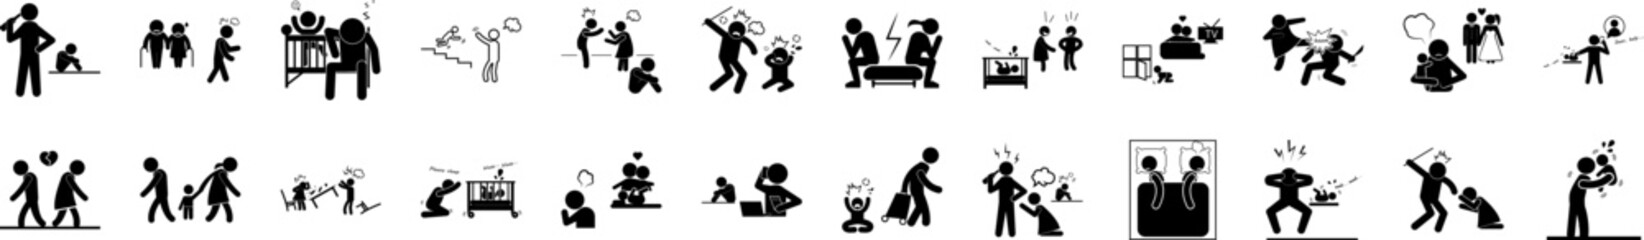 Family bad icon collections vector design